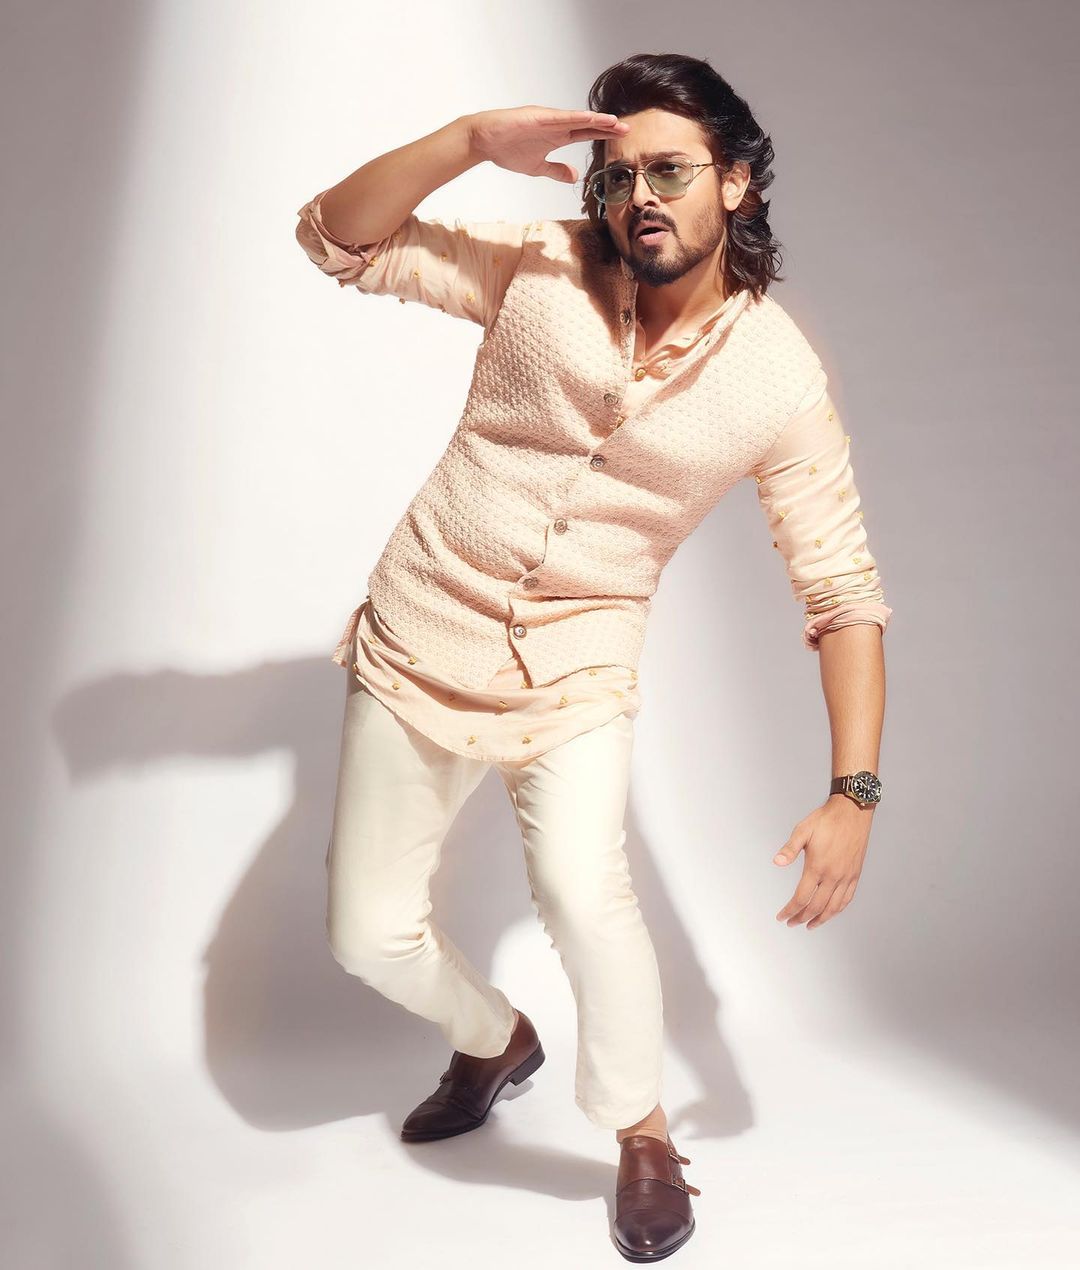 Ashish Chanchlani or Bhuvan Bam: Who looks more stylish in traditional outfit? 4508